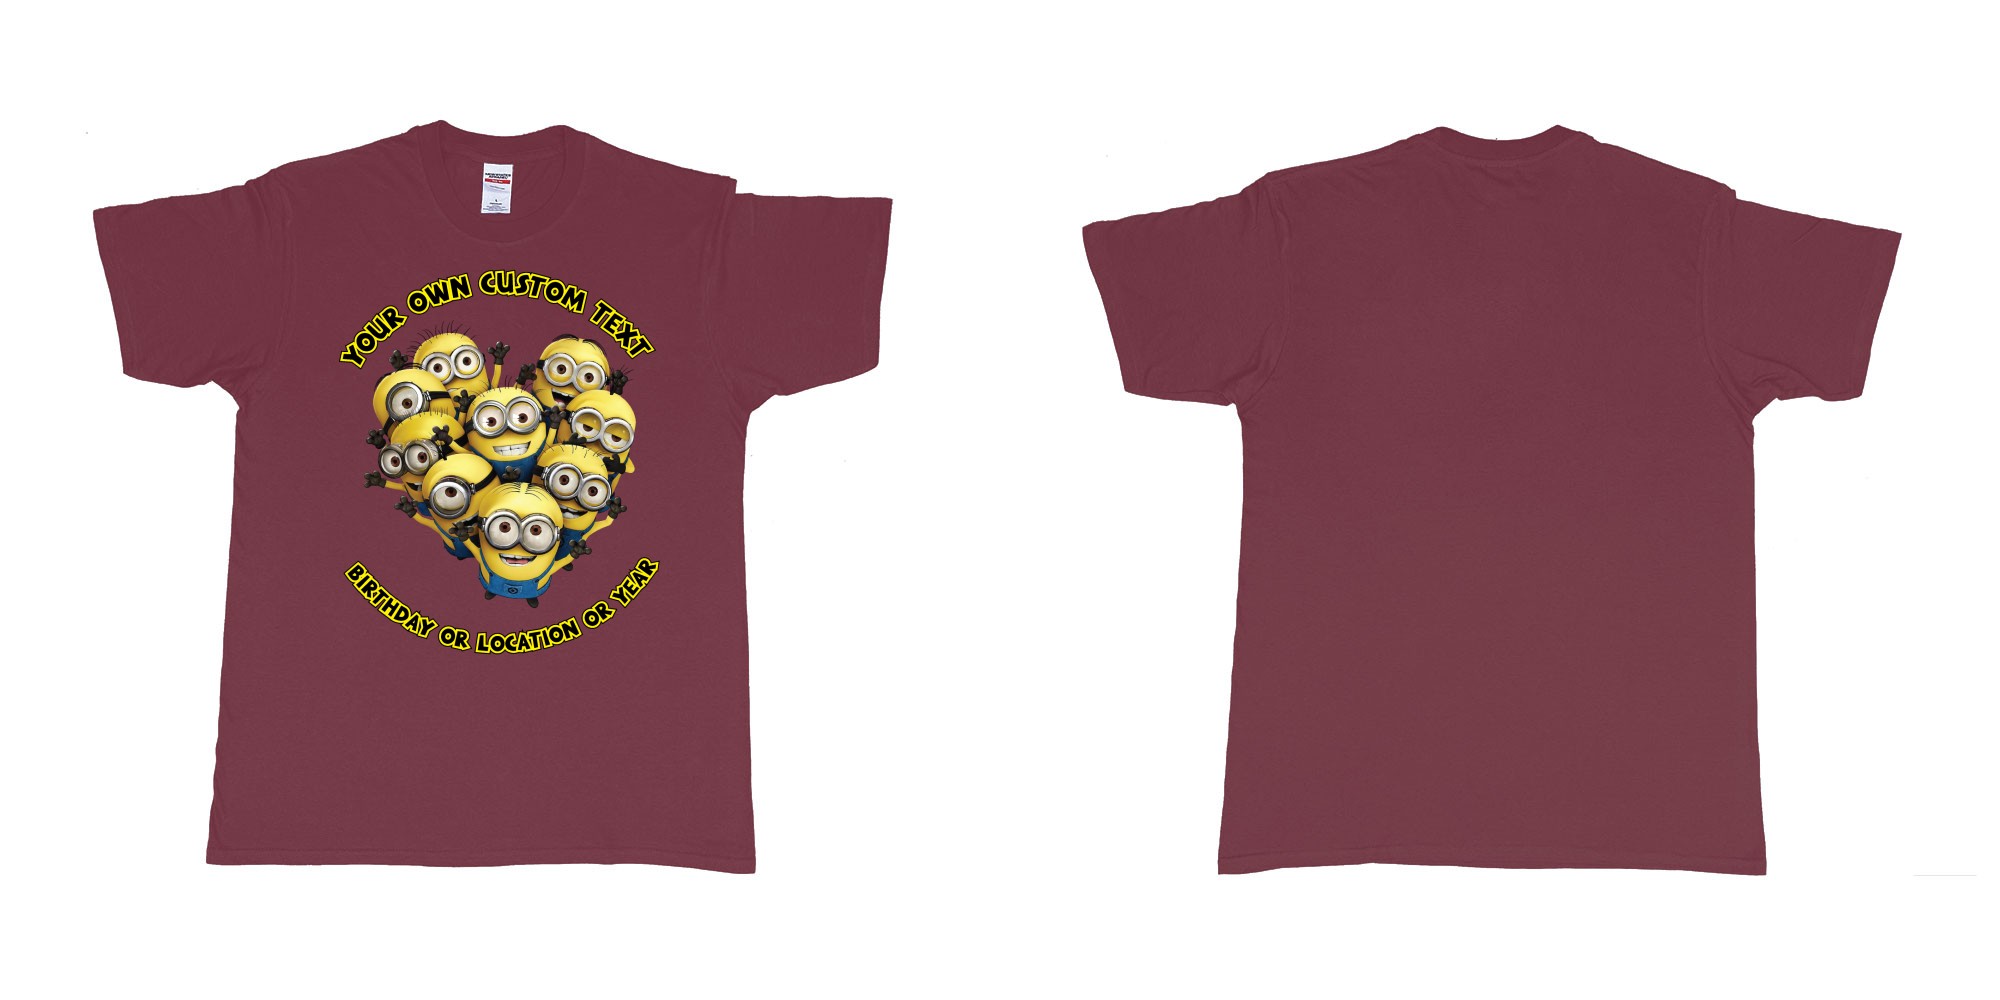 Custom tshirt design minions celebrating you in fabric color marron choice your own text made in Bali by The Pirate Way